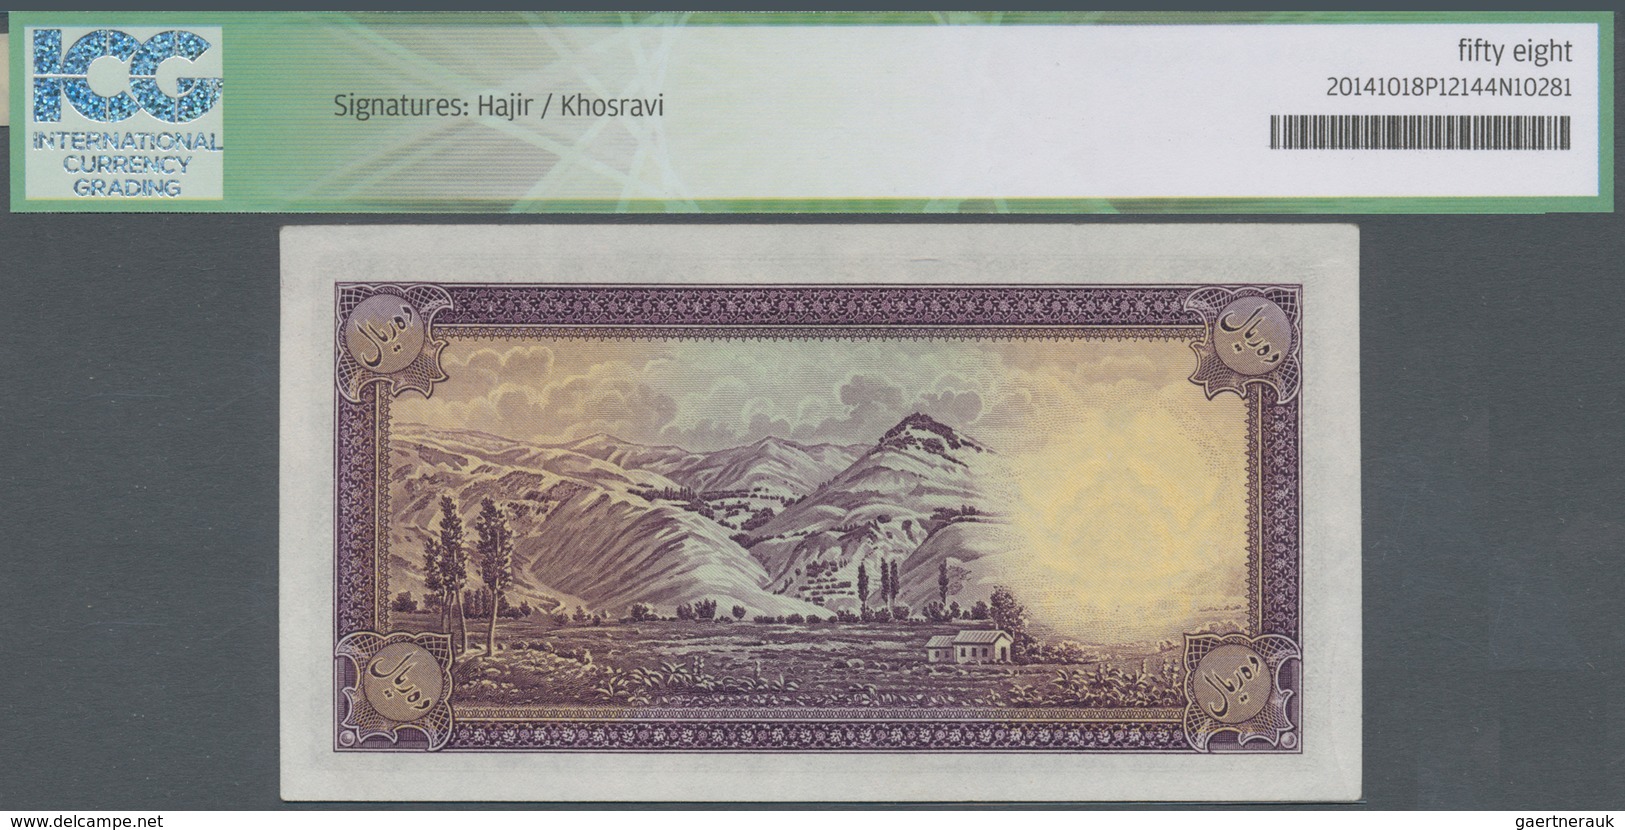 Iran: 10 Rials ND(1938) P. 33A, In Nice Condition With Crisp Paper And Original Colors, No Holes Or - Irán